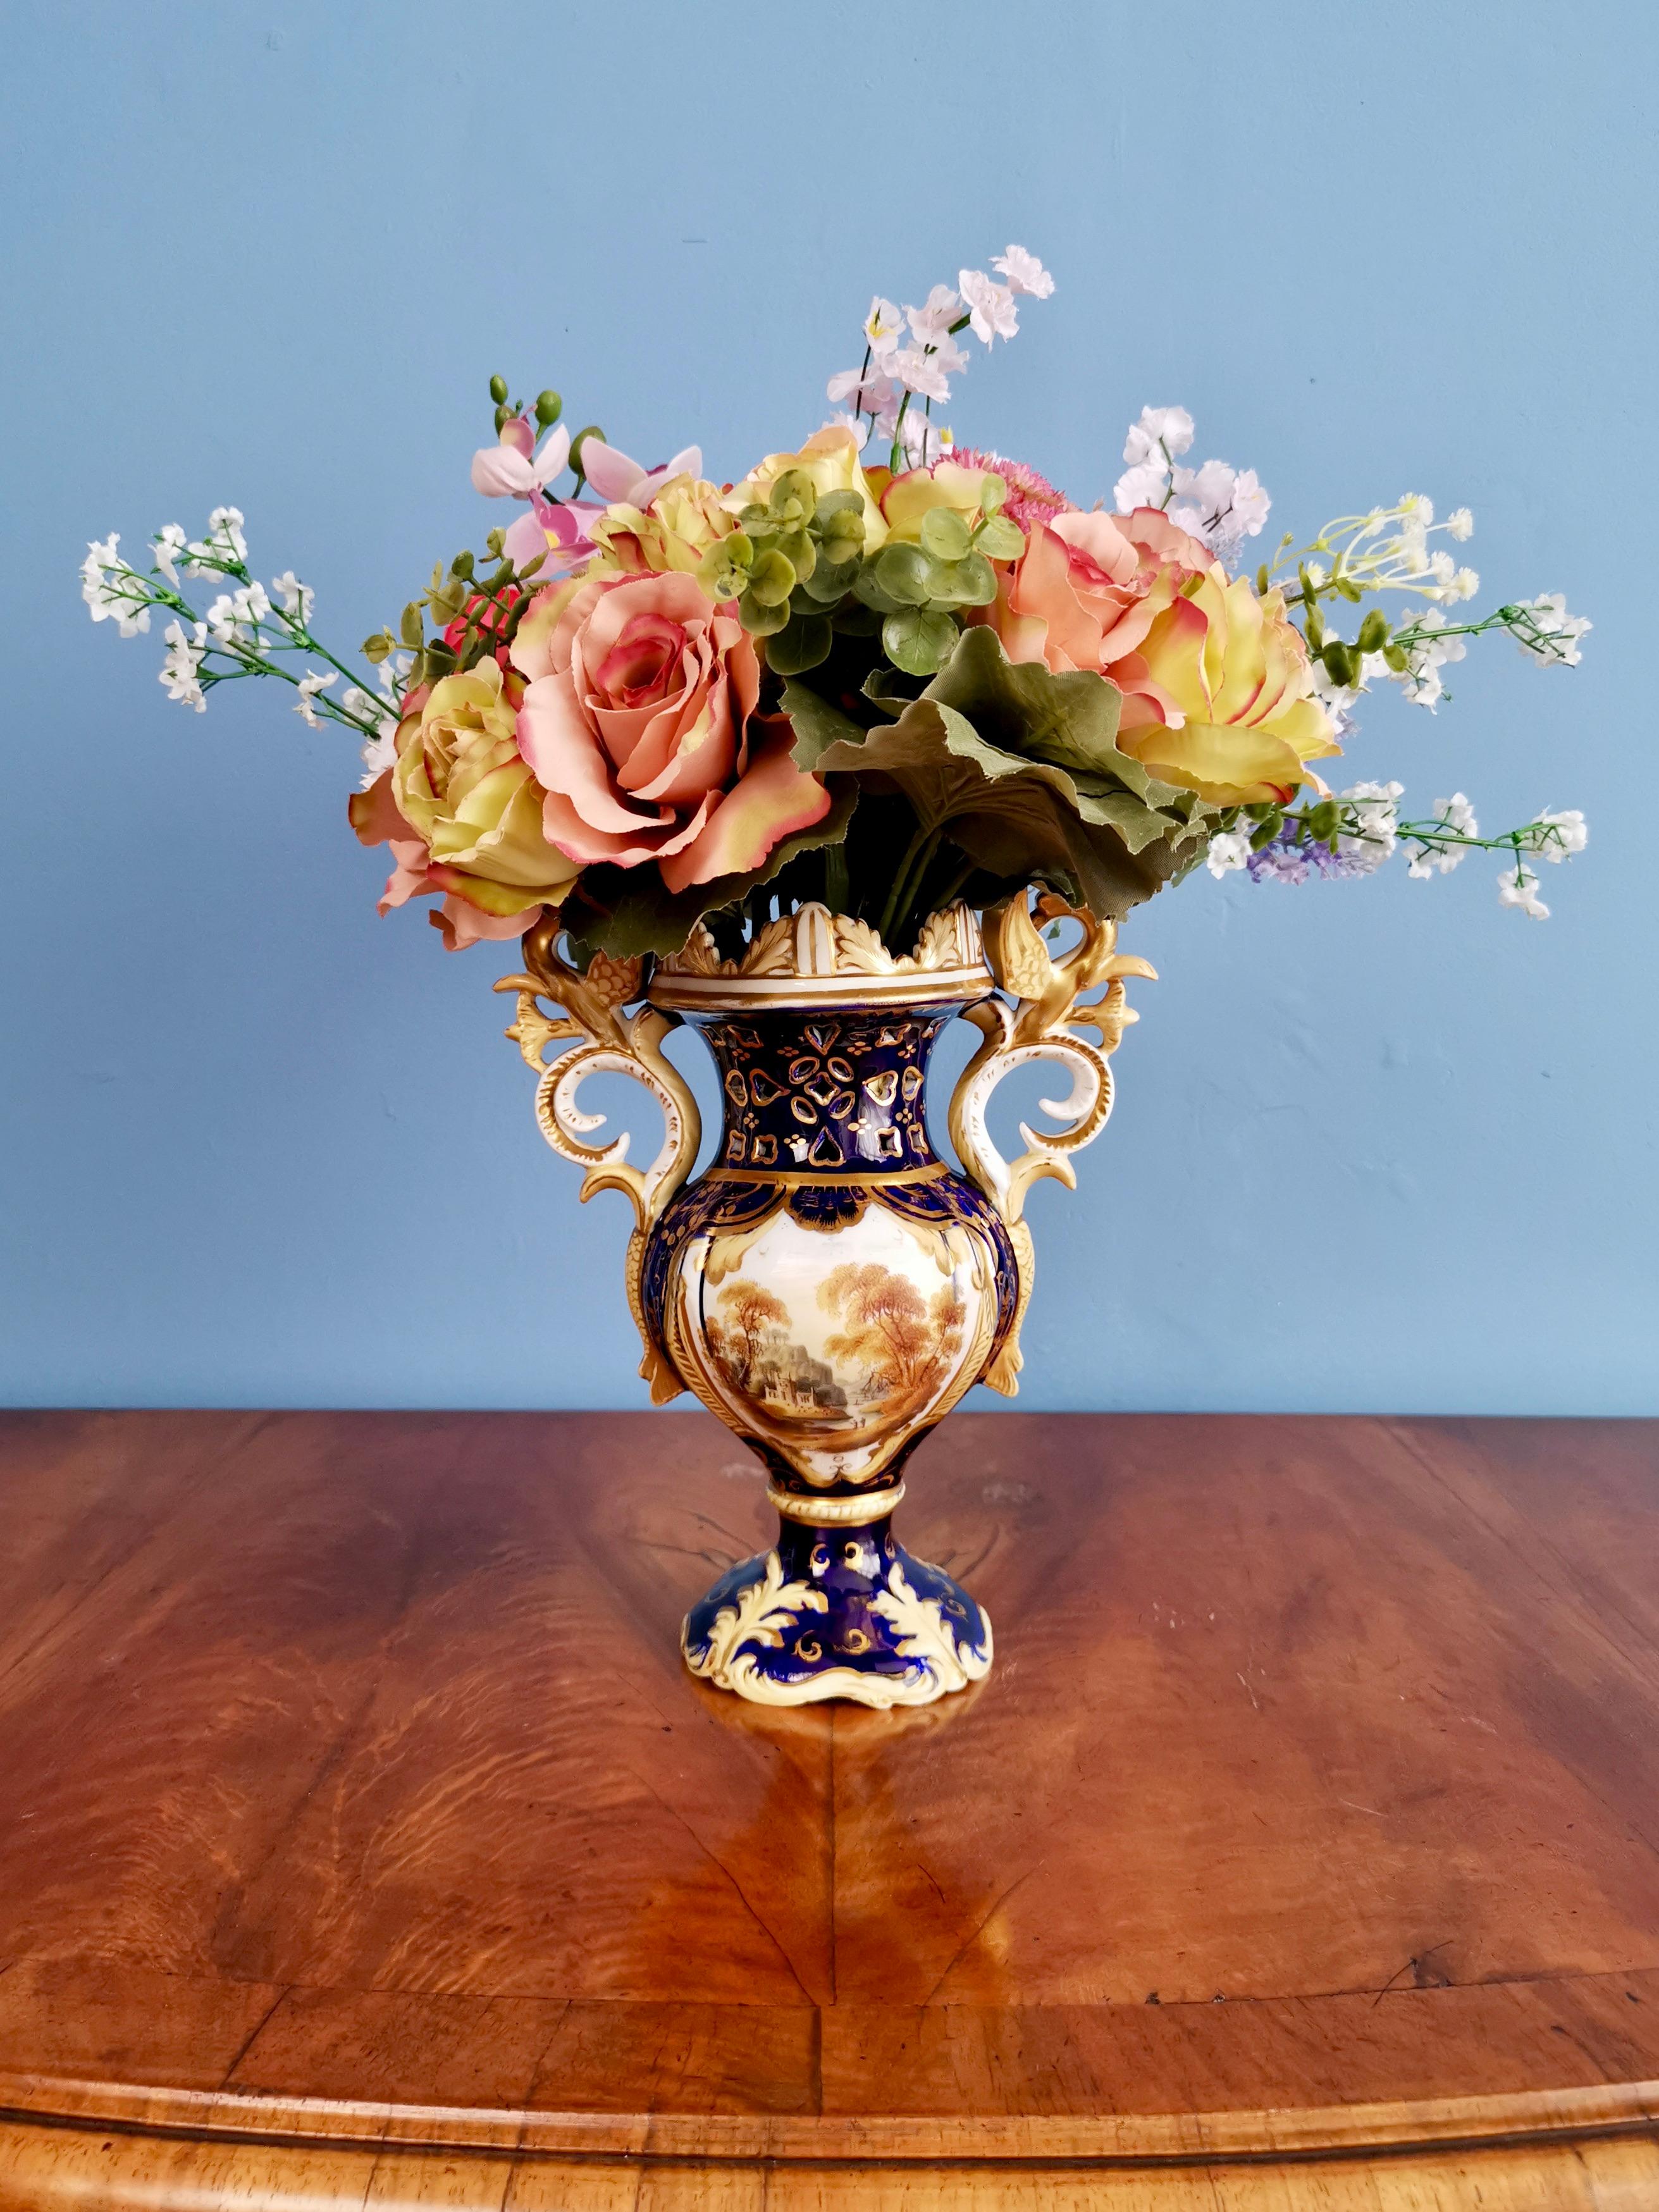 On offer is a beautiful porcelain vase made by Samuel Alcock in about 1840 during the Rococo Revival era. The vase has griffin-shaped handles, a cobalt blue ground, lavish gilt and a beautiful landscape painting.

Samuel Alcock was a major potter in